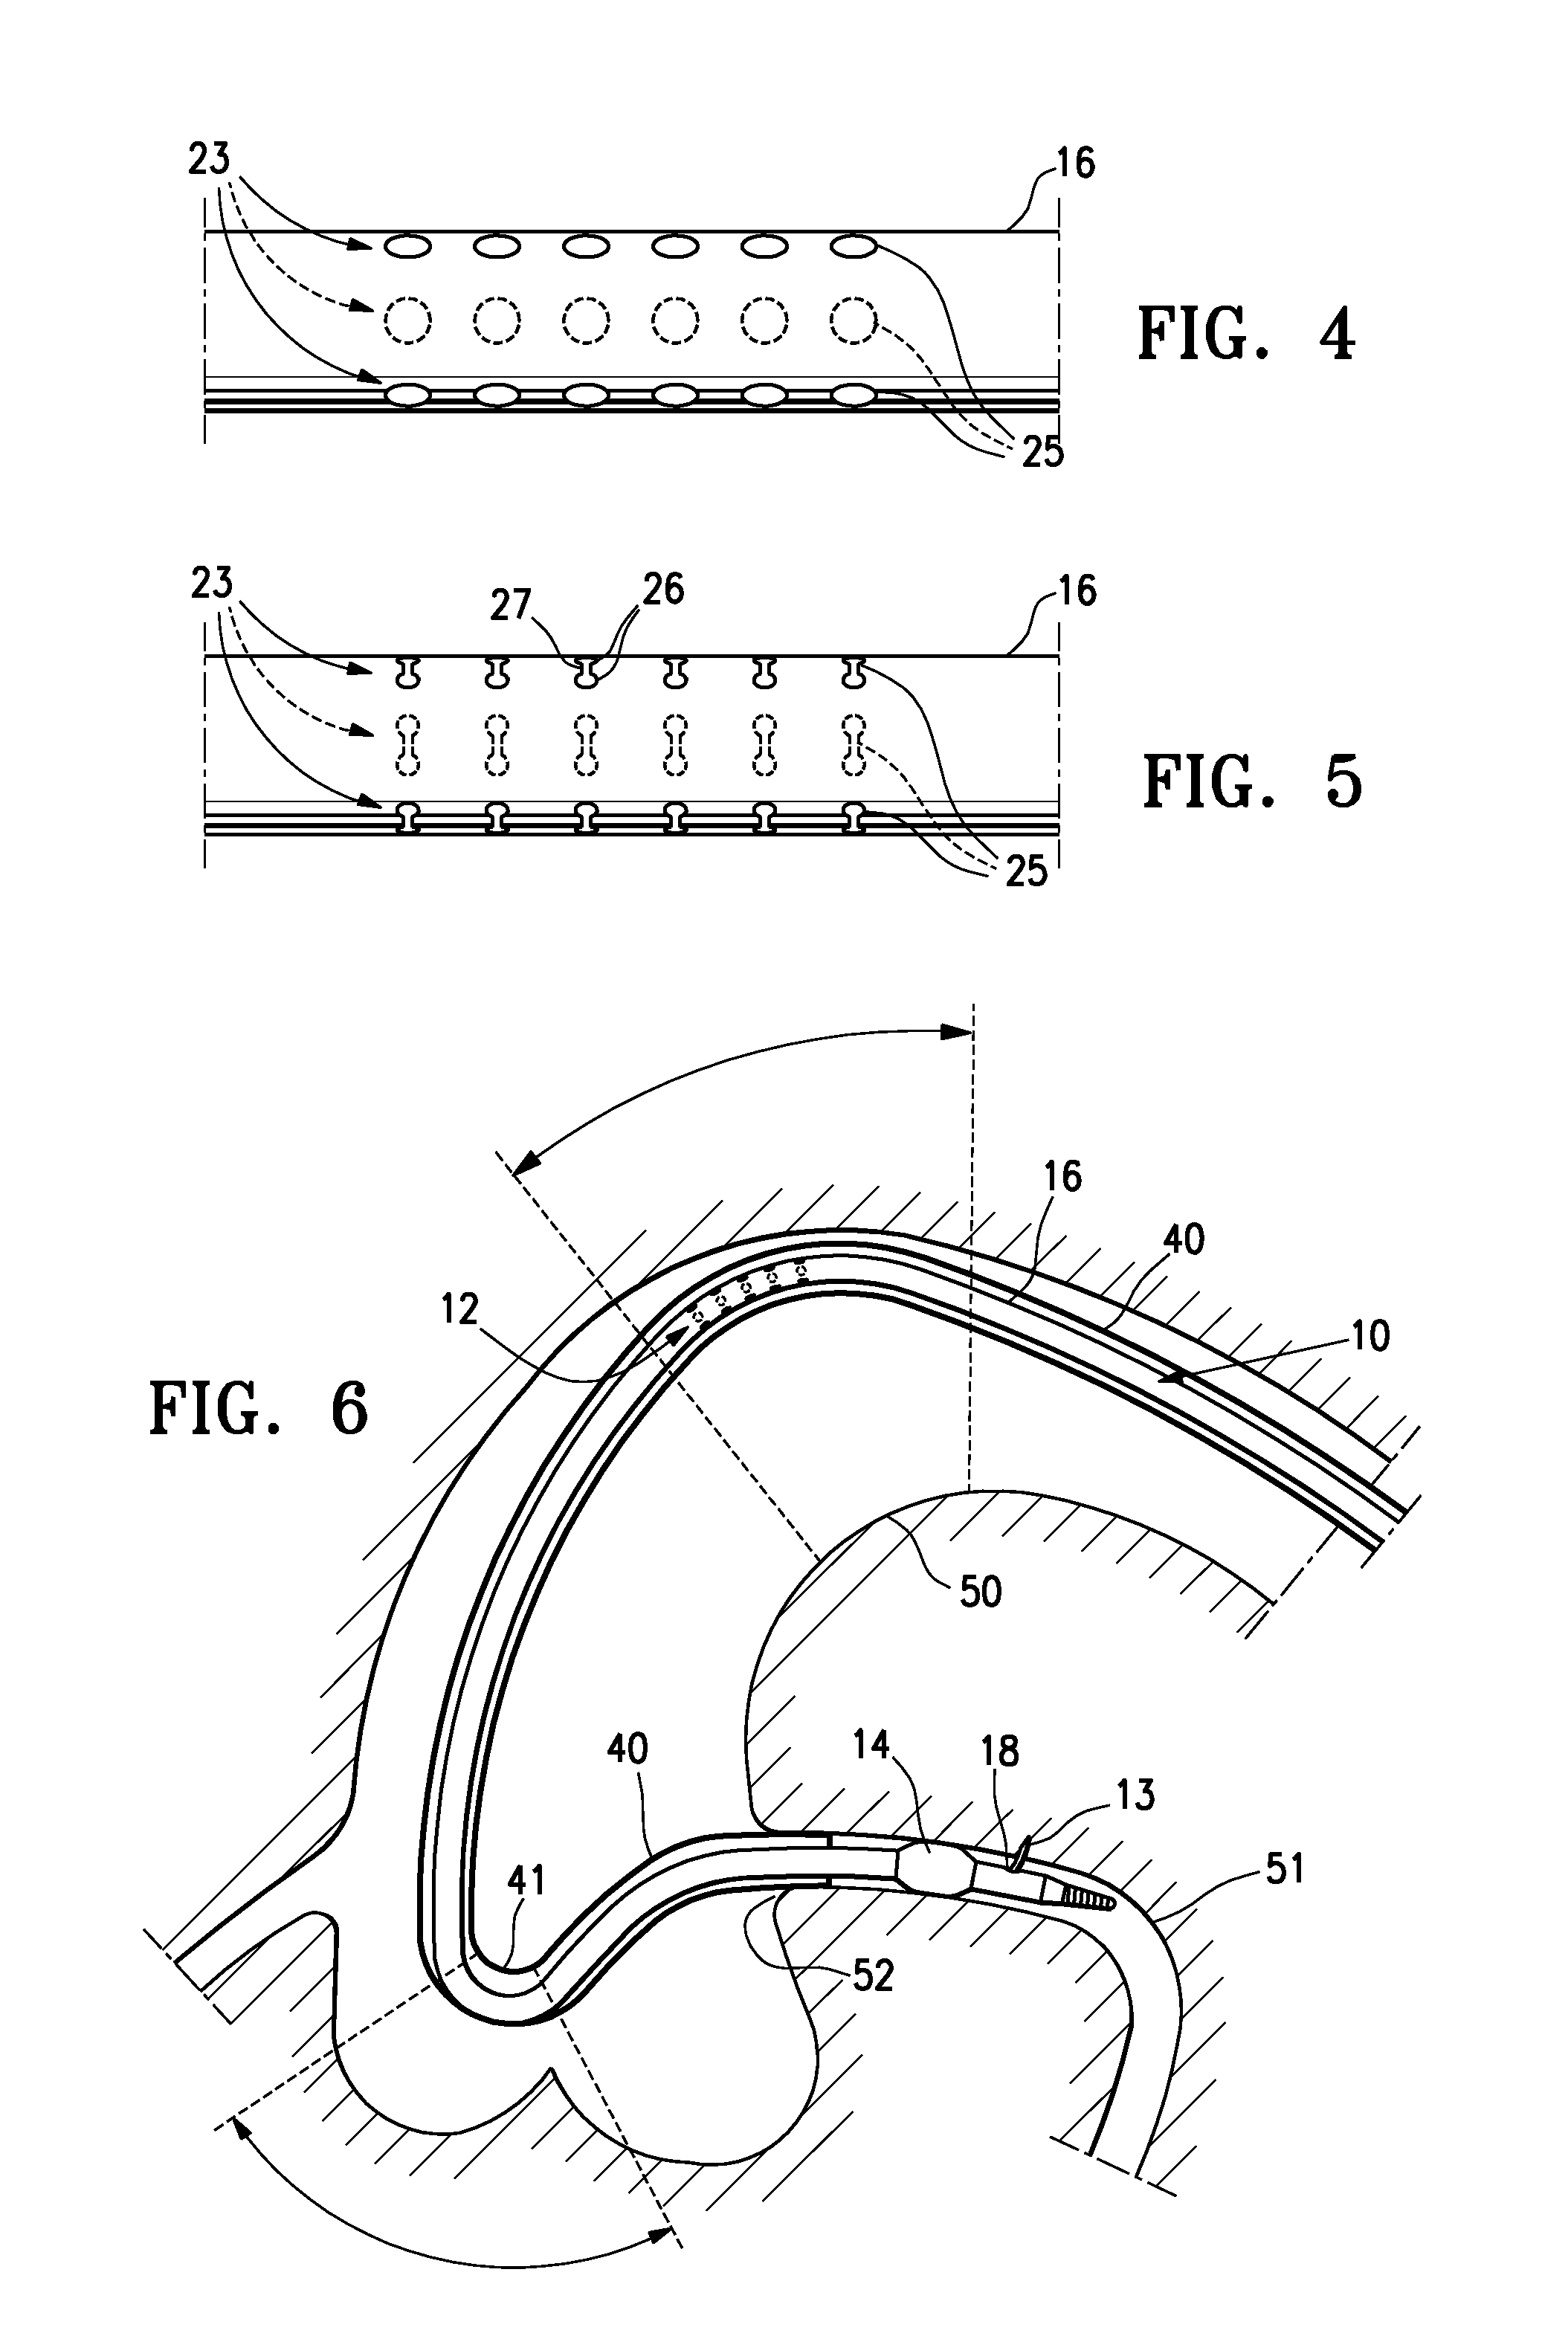 Catheter configured for incremental rotation